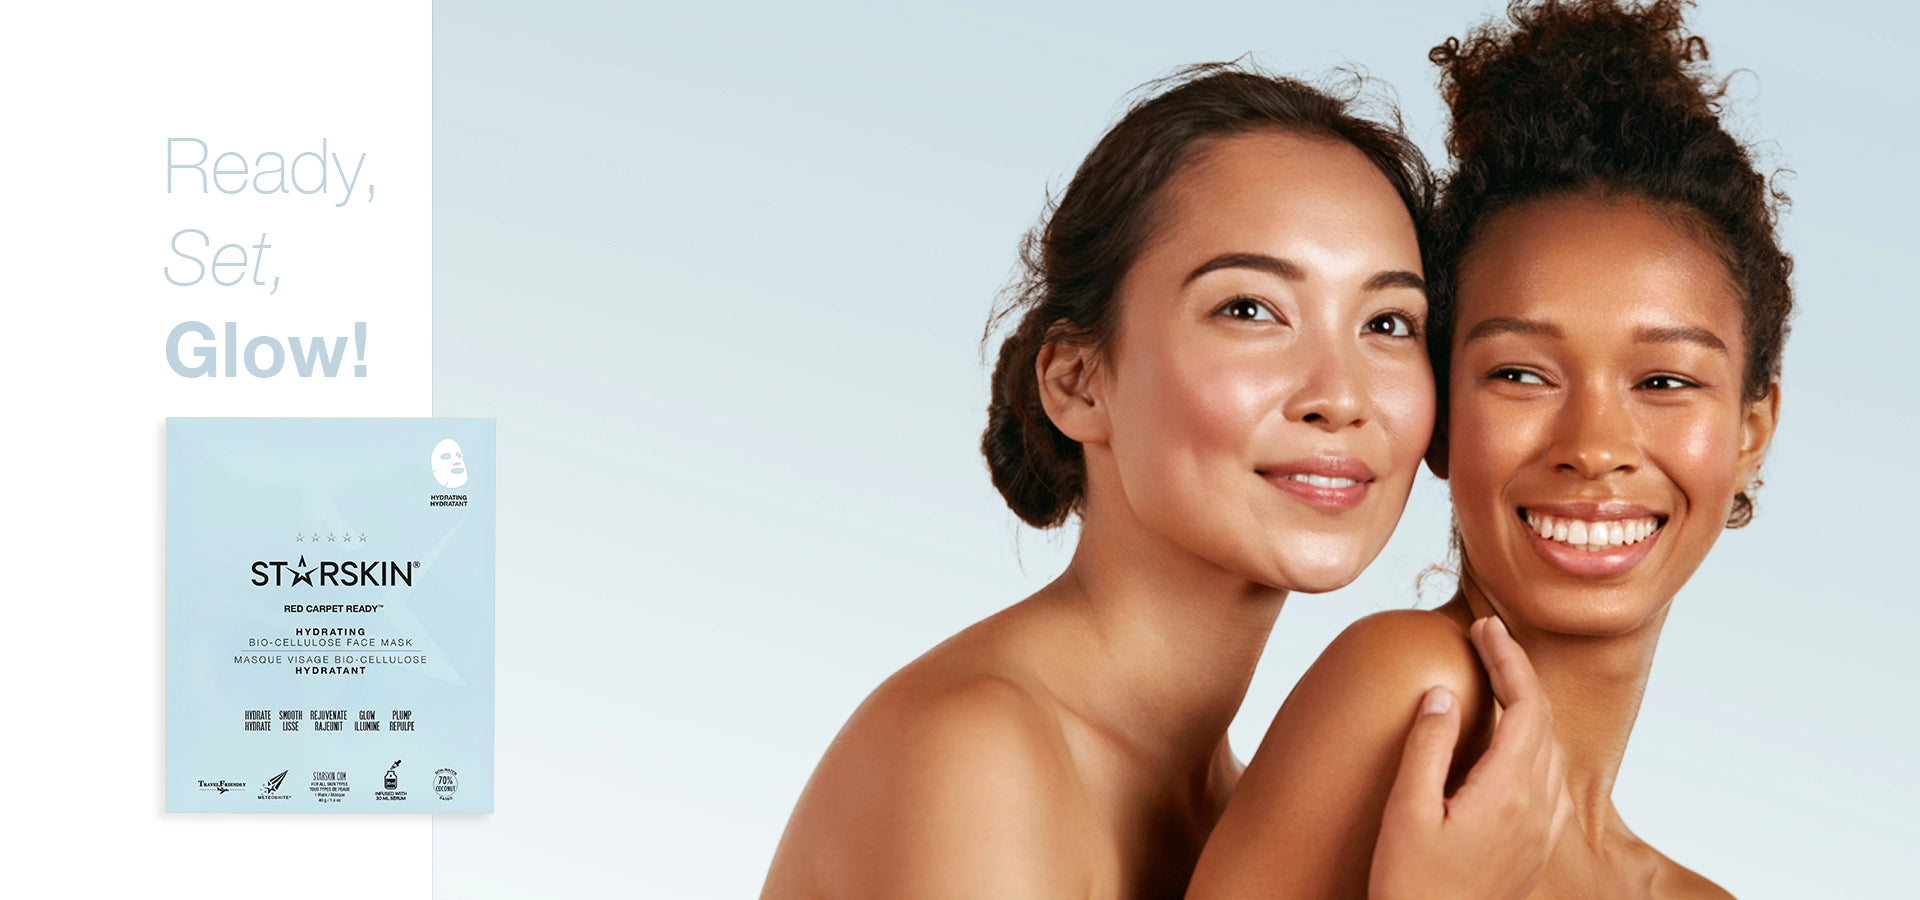 Main banner showing two beautiful women and promoting the Red Carpet Ready Facial mask